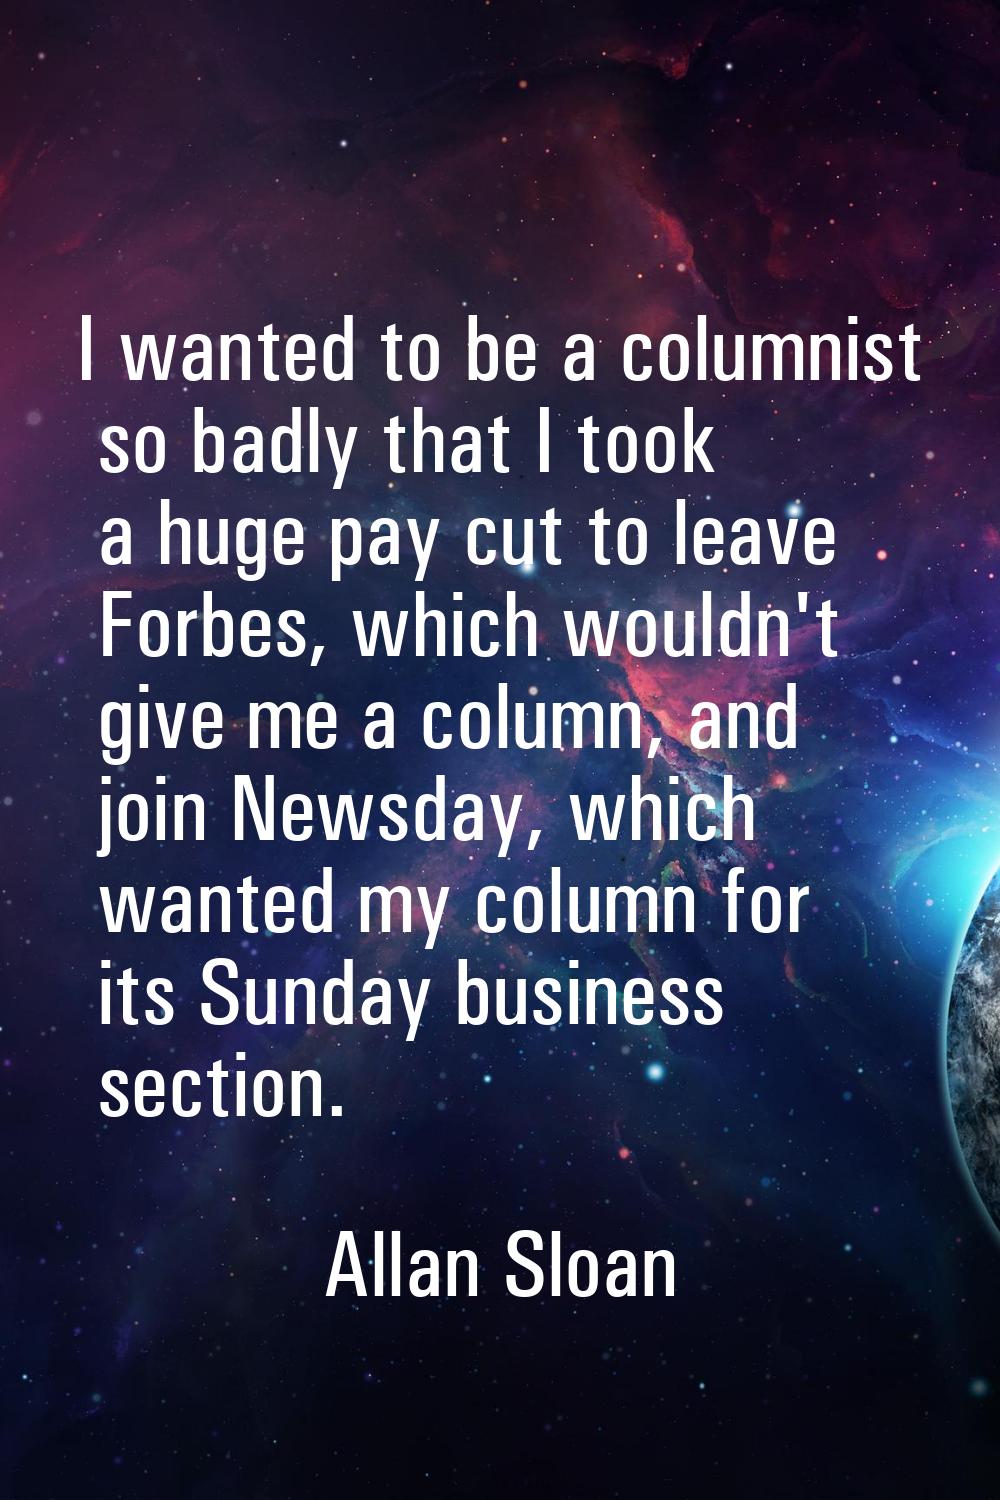 I wanted to be a columnist so badly that I took a huge pay cut to leave Forbes, which wouldn't give